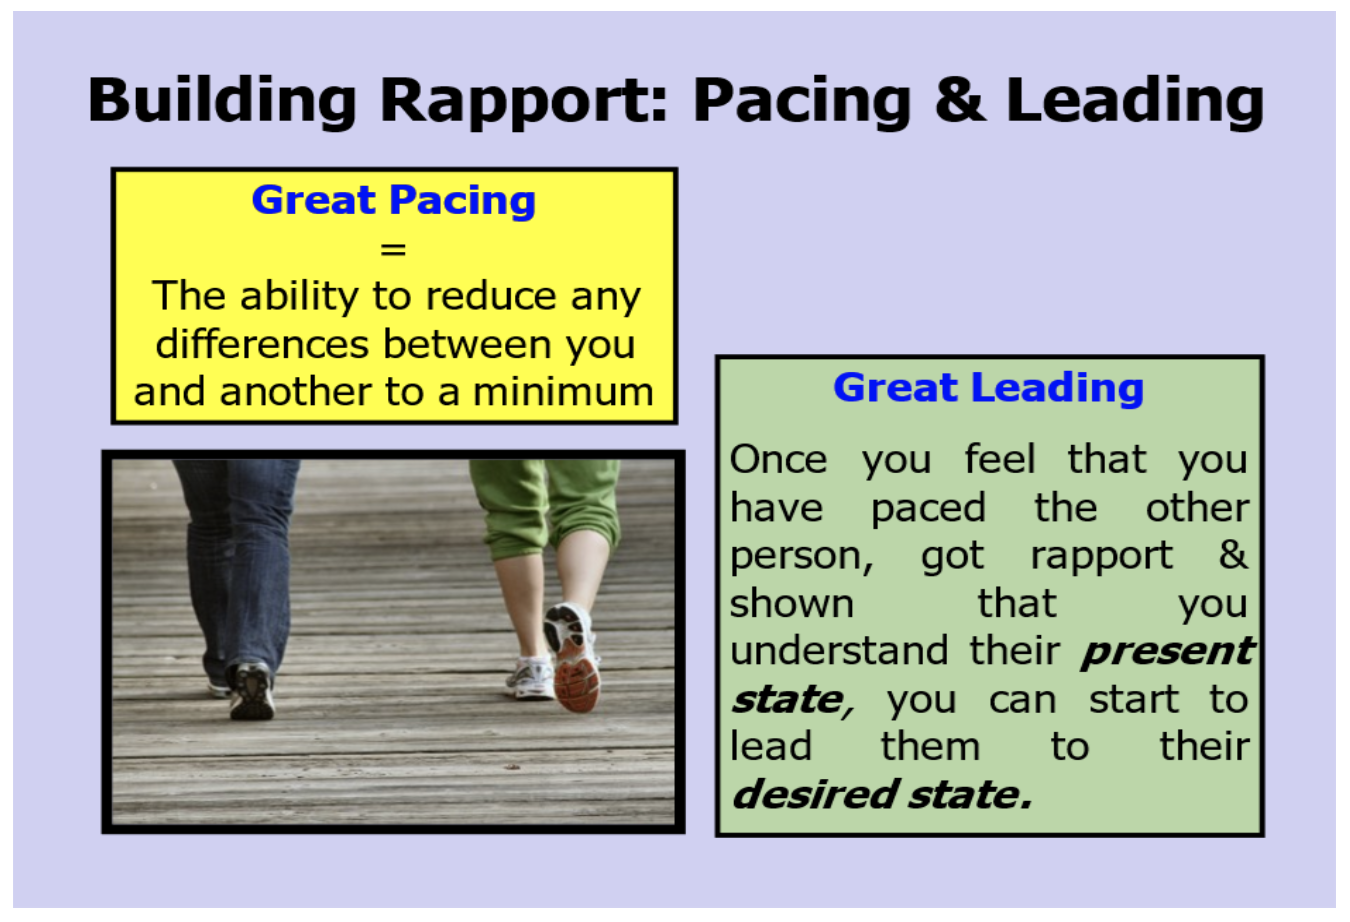 Building Rapport: Pacing & Leading